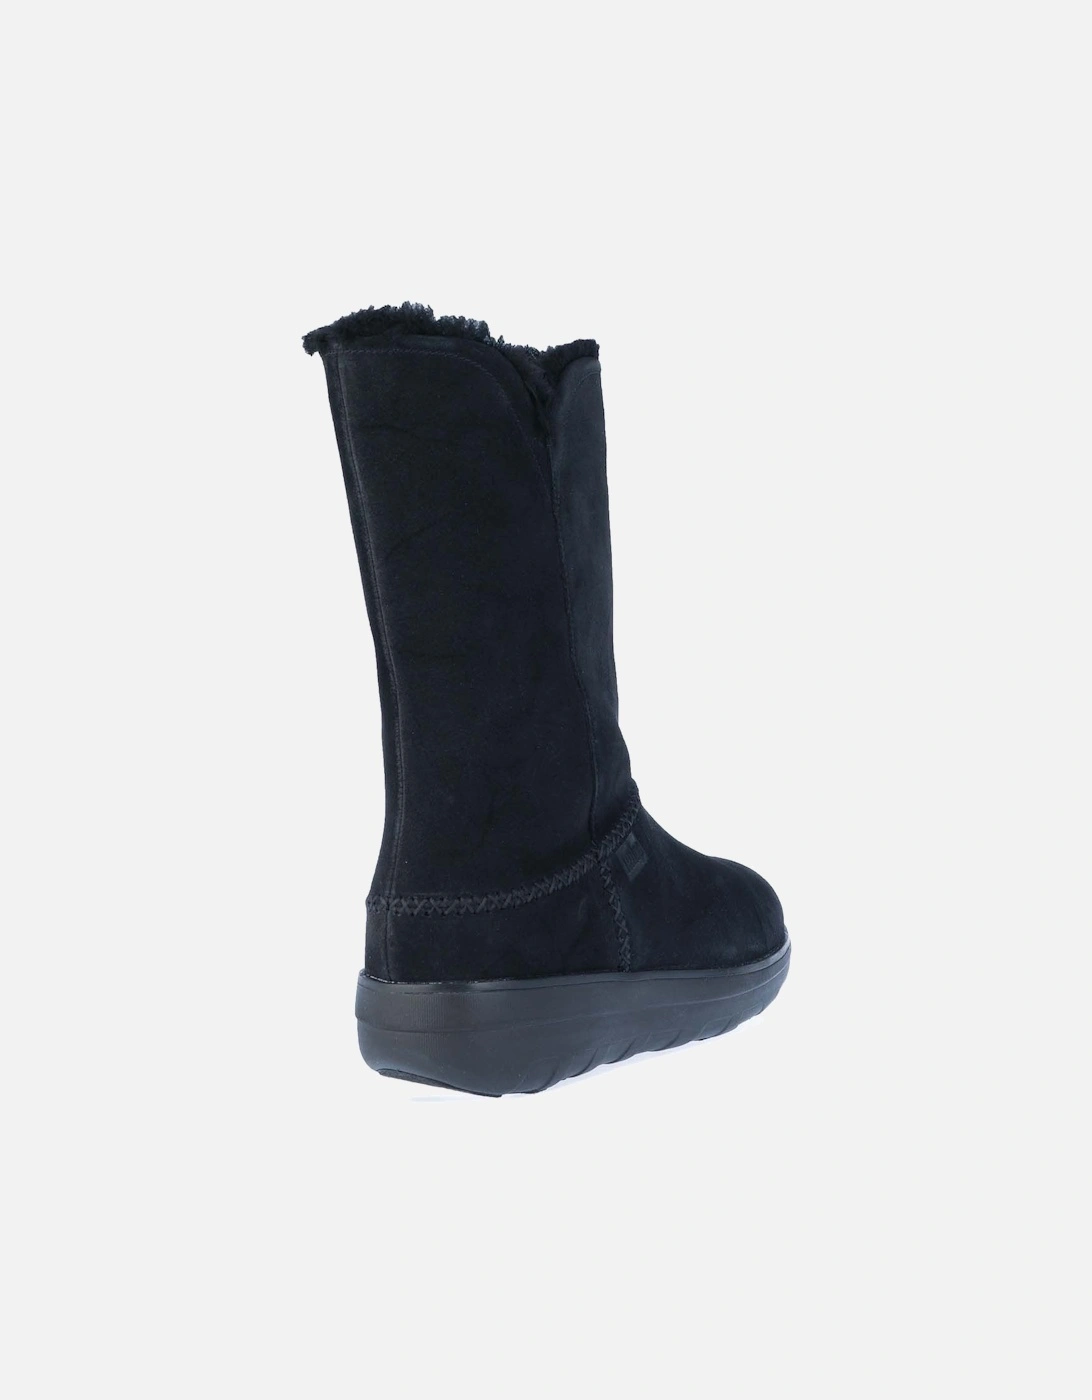 Womens Mukluk Shearling-Lined Suede Calf Boots